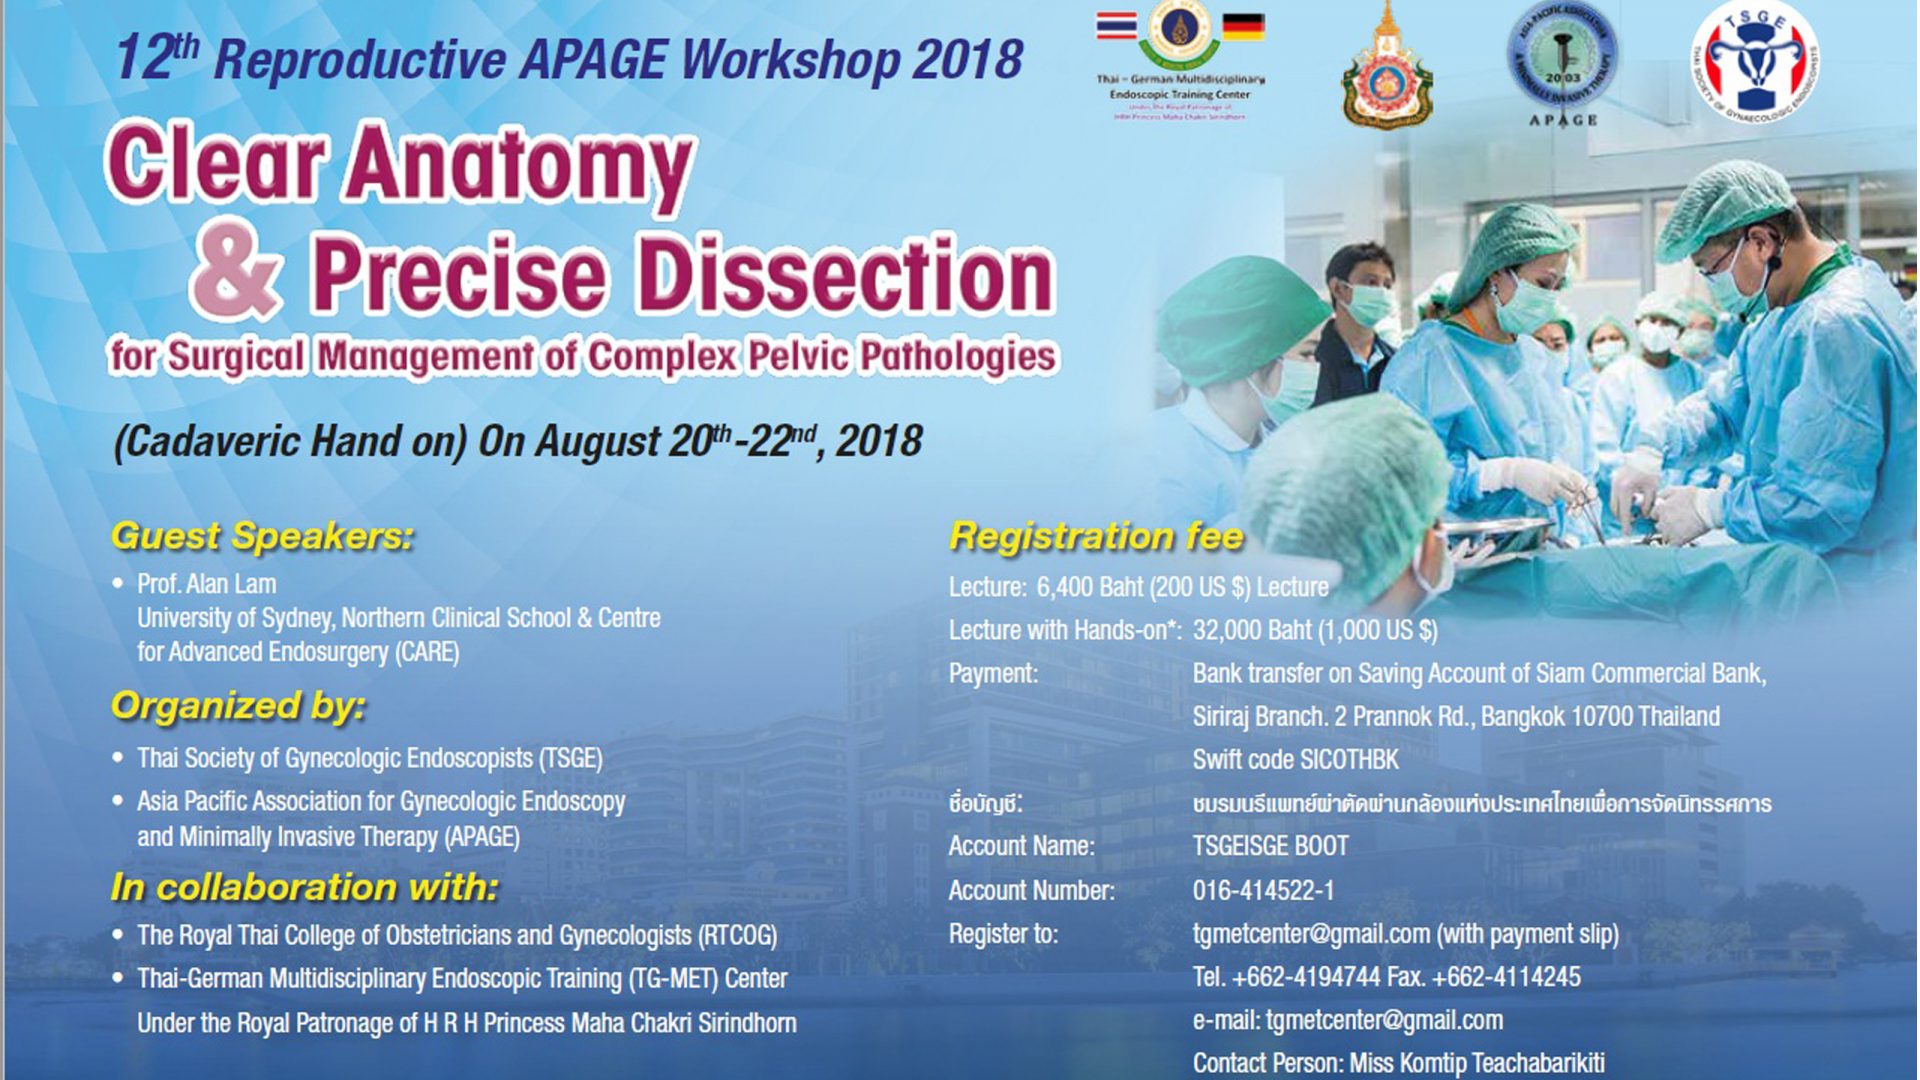 12th Reproductive APAGE Workshop 2018